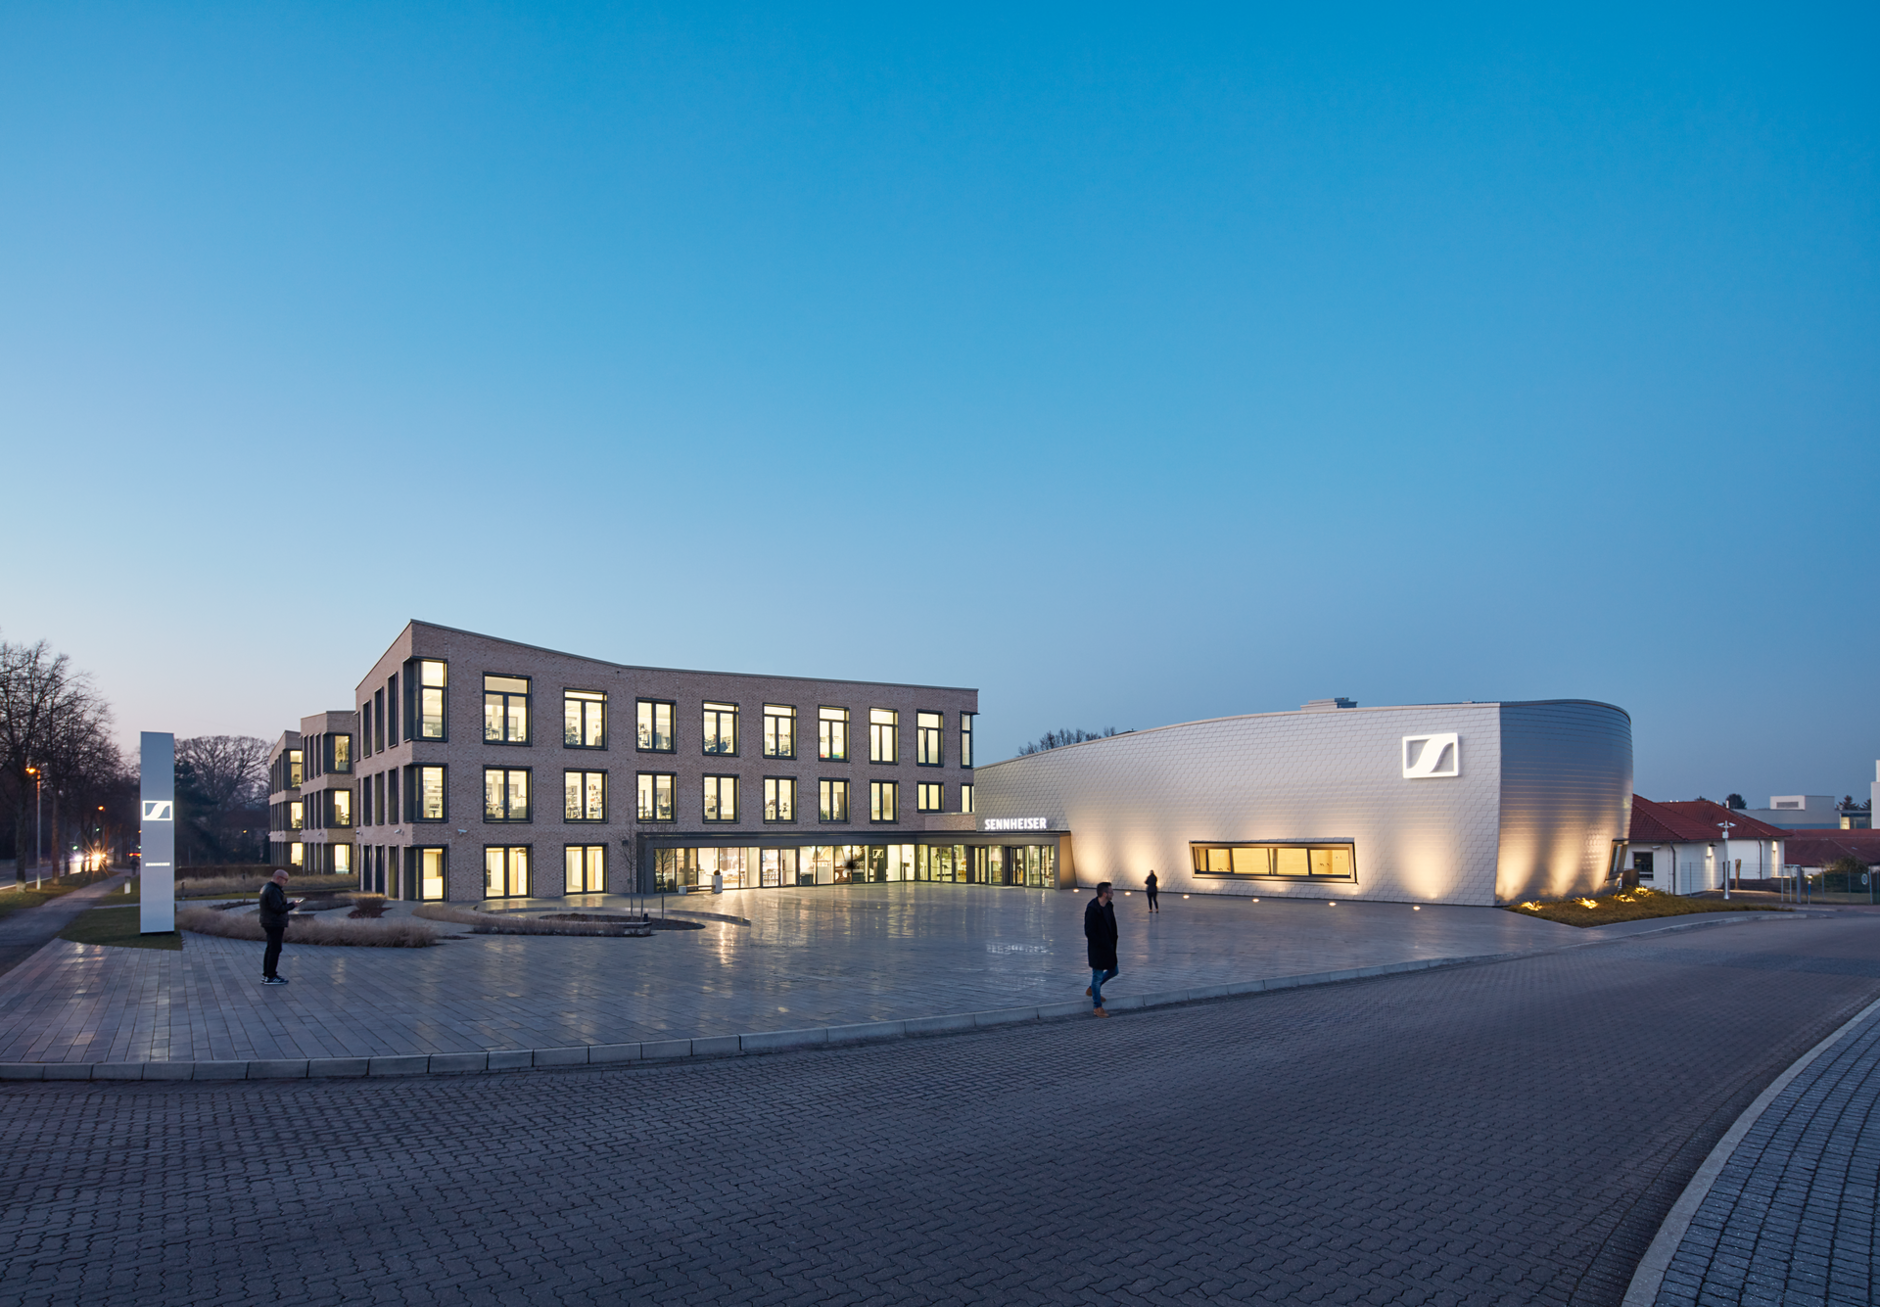 Forecourt and Innovation Campus in Wennebostel during evening hours with brigtly lighted windows.